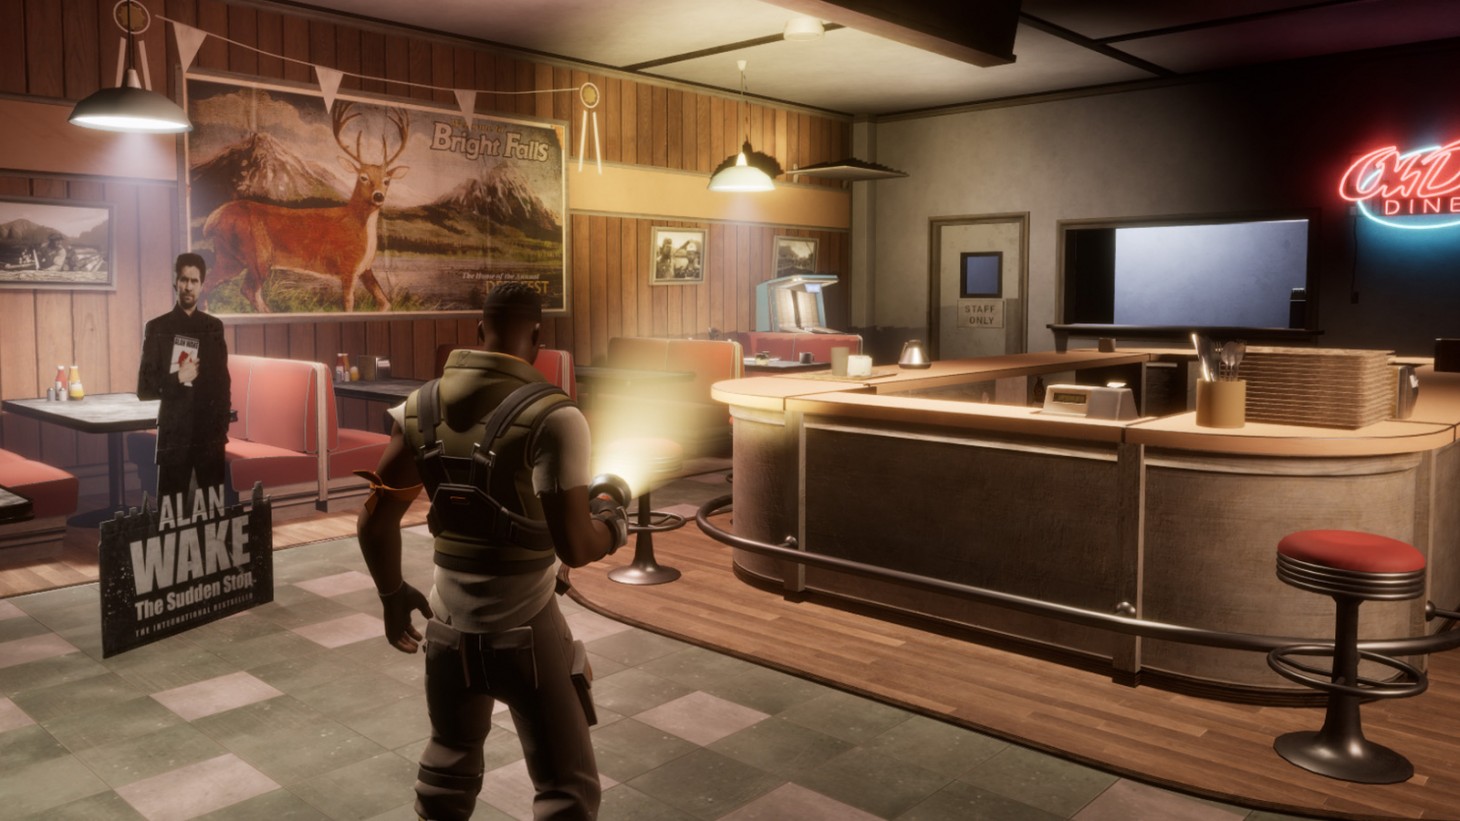 Surprisingly, Alan Wake arrived in Fortnite in a rare and wonderful way